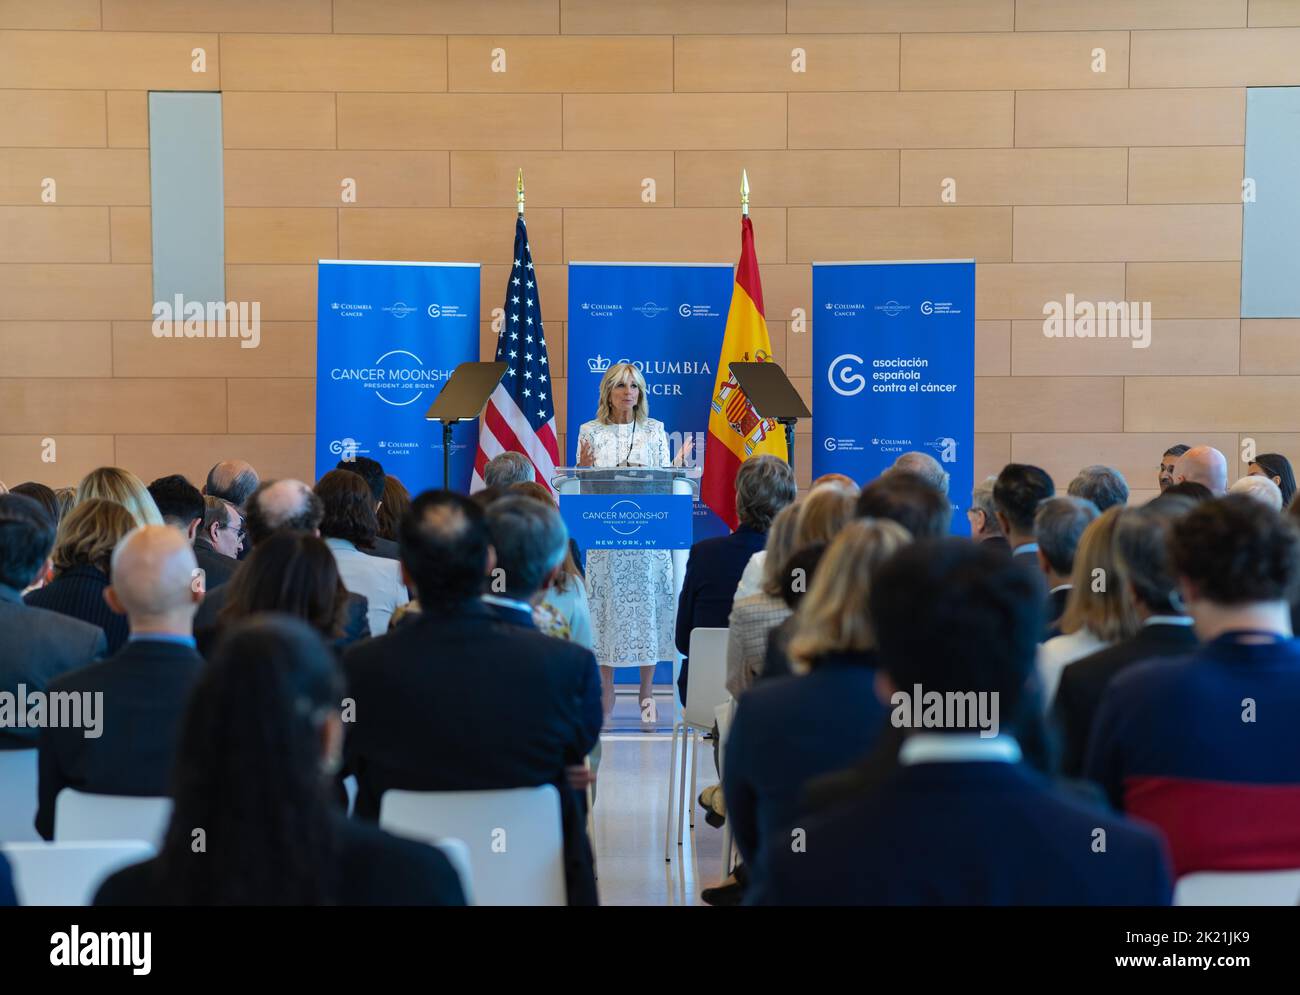 On Wednesday, September 21, 2022, as part of the Biden Administration's Cancer Moonshot, First Lady Jill Biden and Queen Letizia of Spain, Honorary President of Asociación Española Contra el Cáncer (“AECC;” Spanish Association Against Cancer), visit the Columbia University Irving Medical Center in the Washington Heights neighborhood of New York City, NY to highlight the importance of cancer research and global cooperation in the effort to end cancer as we know it. Ahead of World Cancer Research Day (September 24th), the First Lady and Queen Letizia's visit will focus on how the Herbert Irving Stock Photo